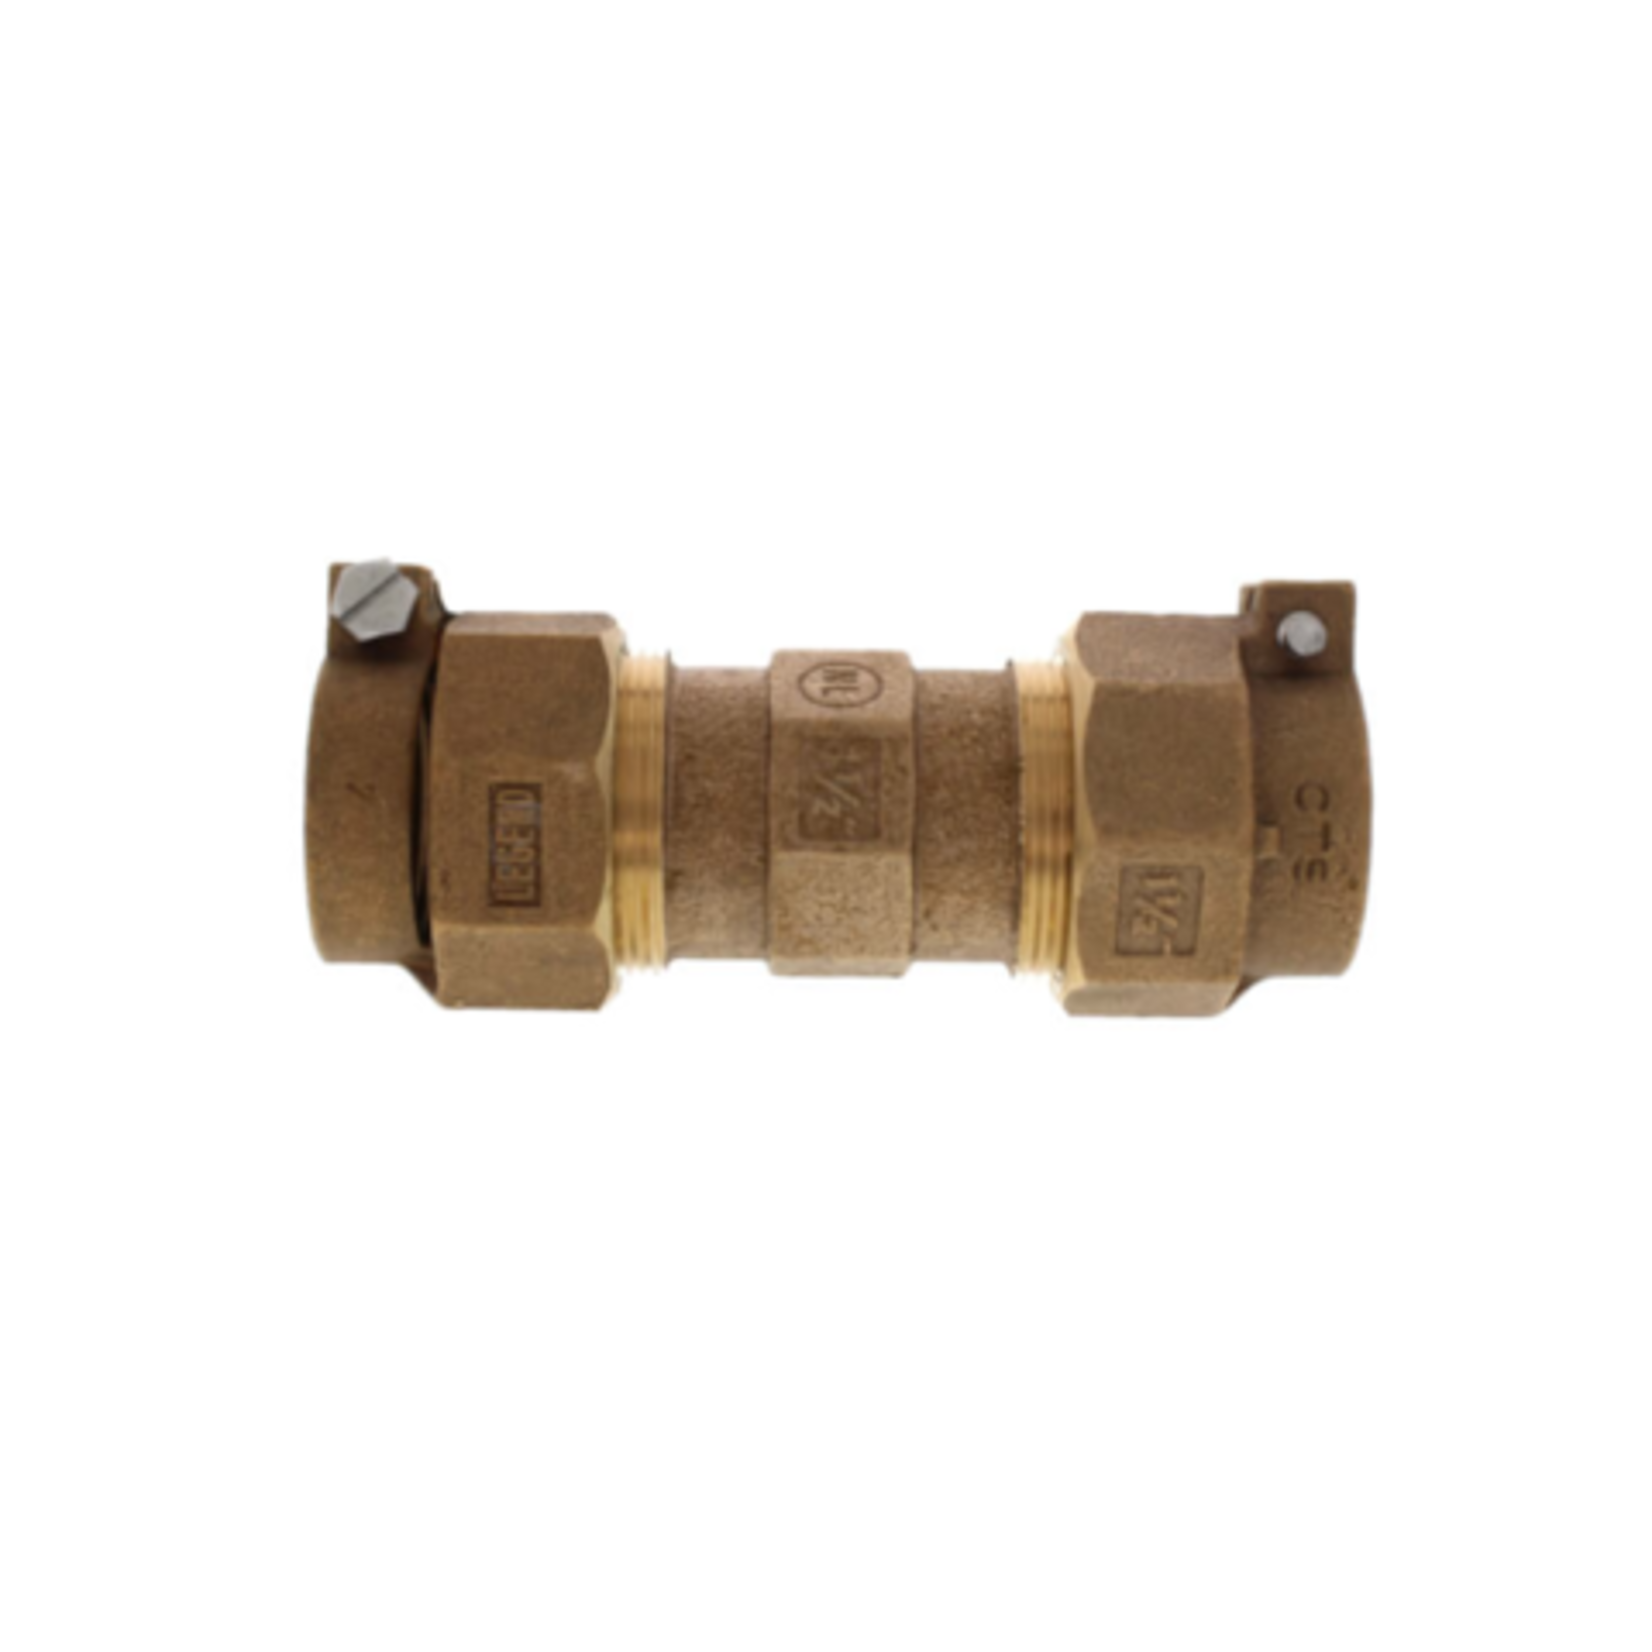 LEGEND VALVE 1 1/2 IN PACK JOINT (CTS) UNION T-4301NL (NO LEAD BRONZE)